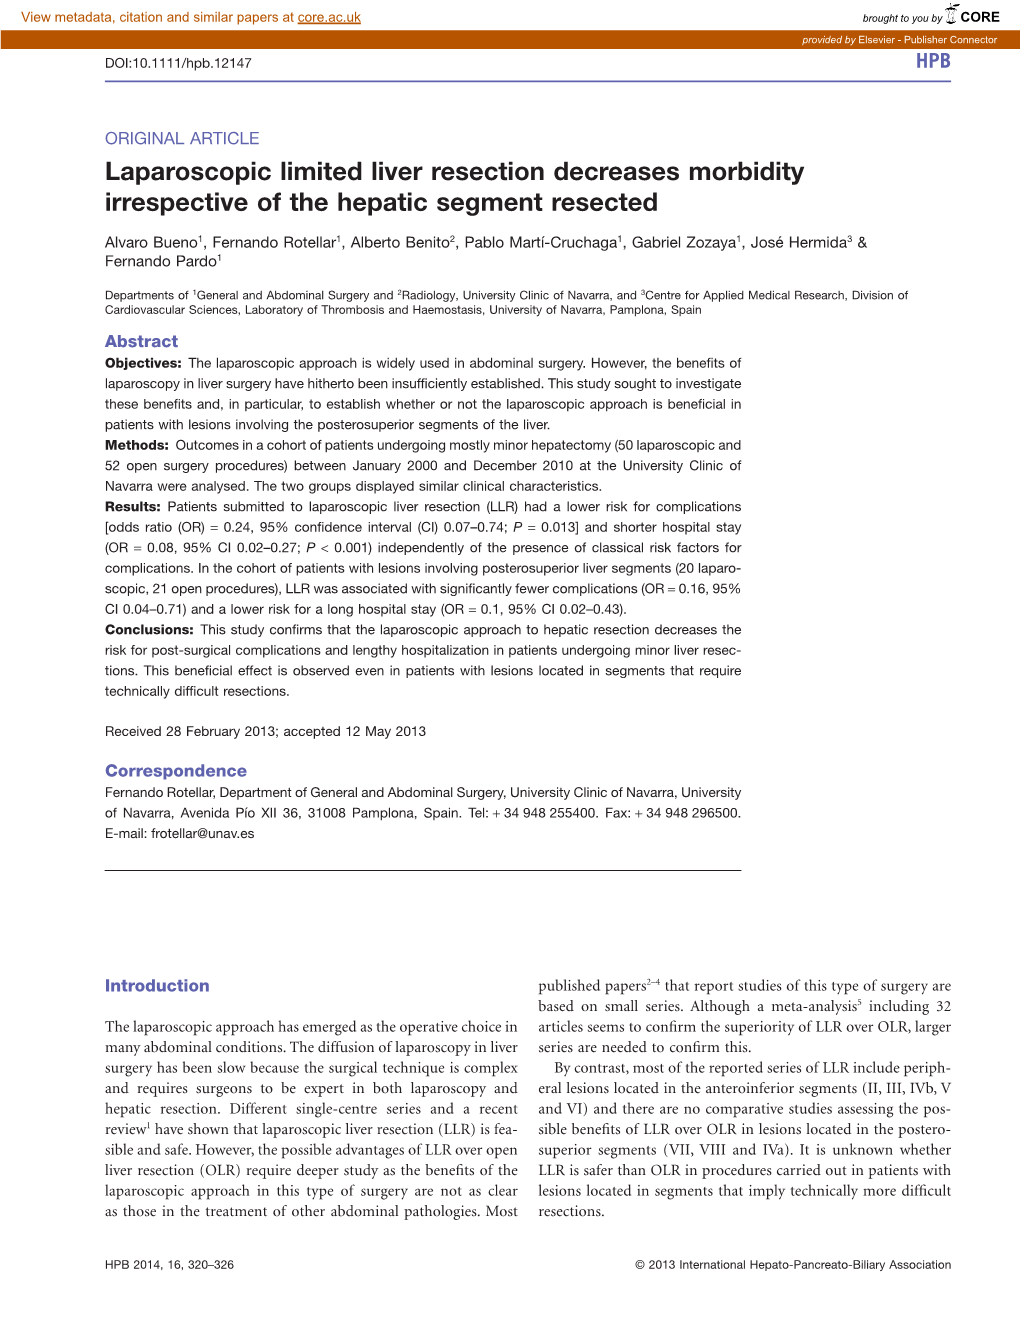 Laparoscopic Limited Liver Resection Decreases Morbidity Irrespective of the Hepatic Segment Resected